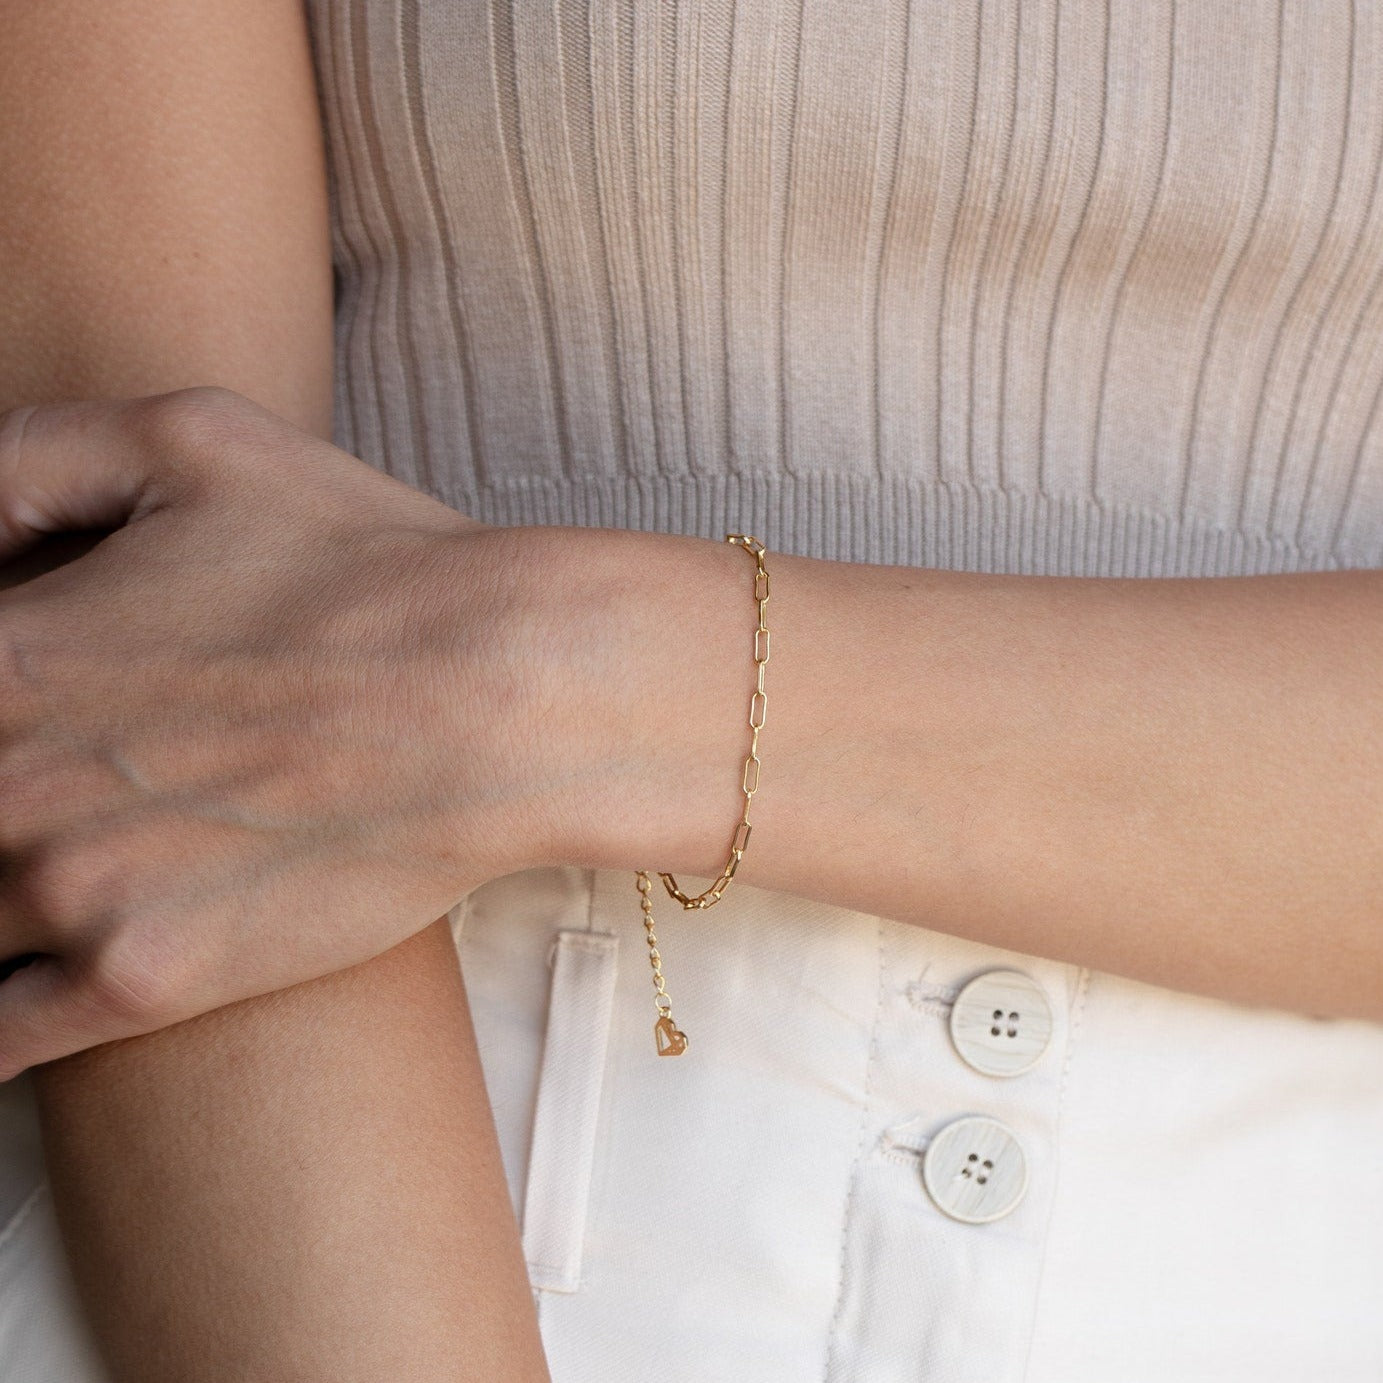 2 or 3 Inch Chain Extender by Caitlyn Minimalist Bracelet